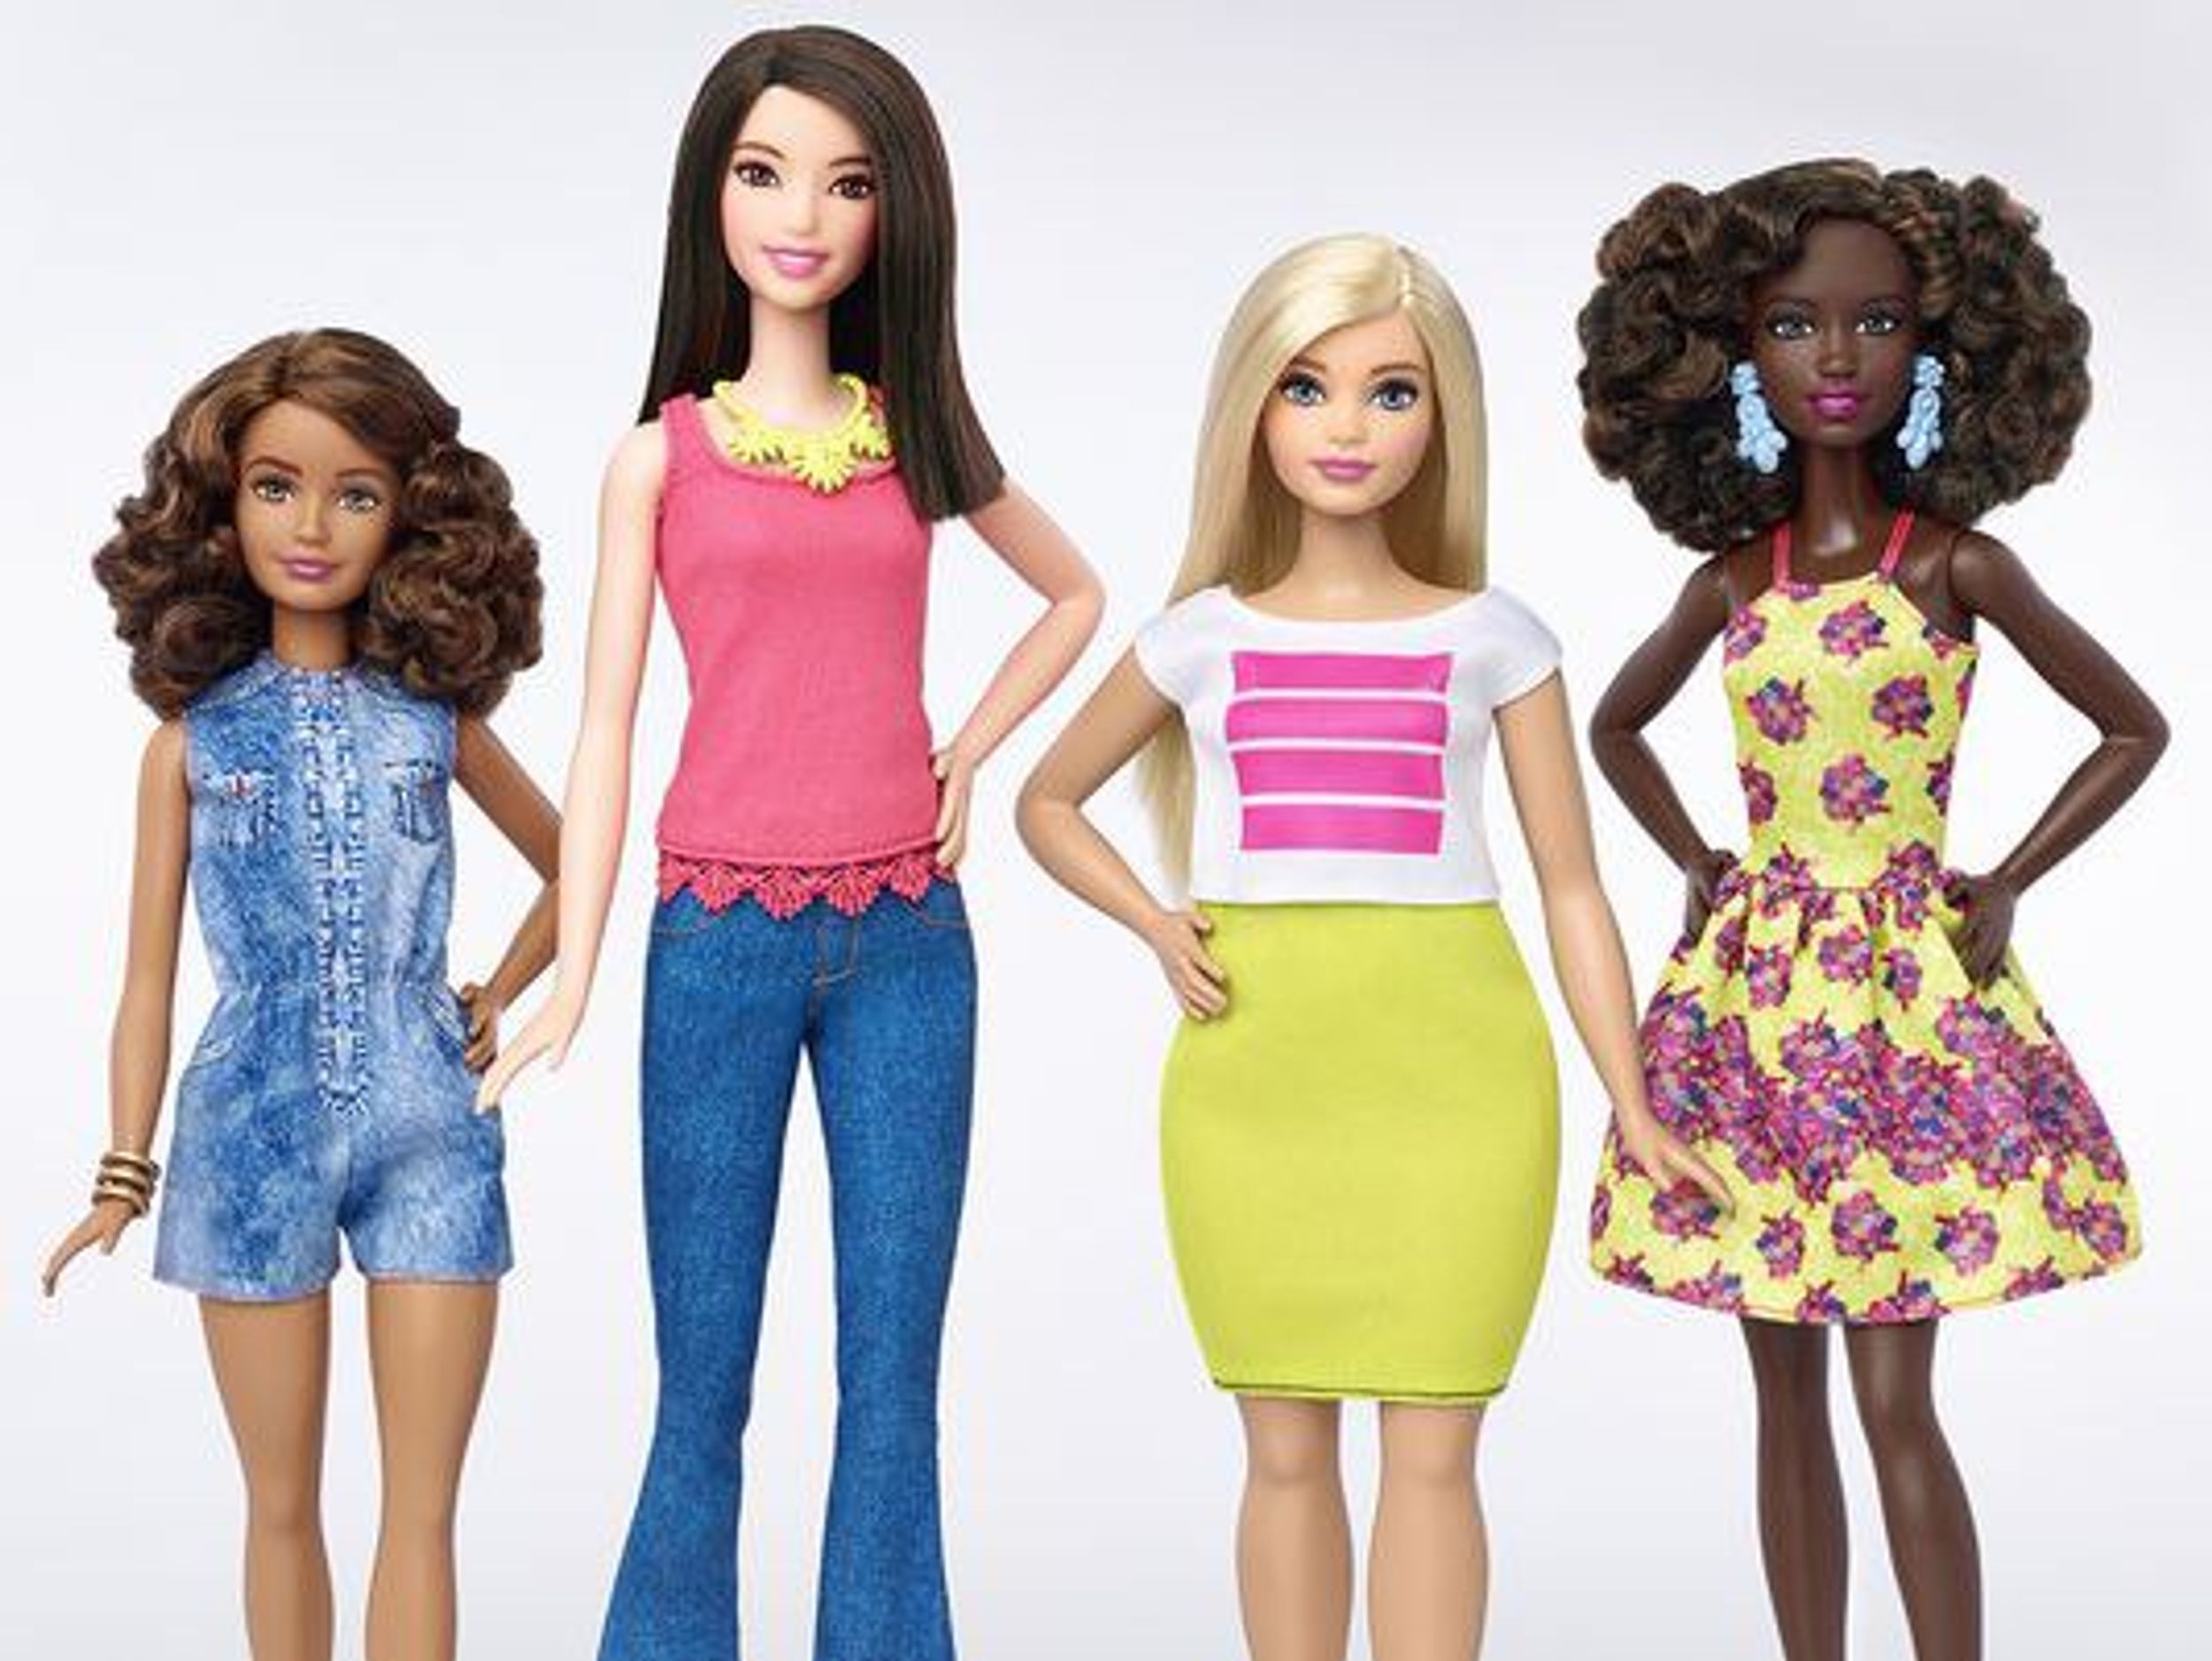 Barbie Doll Diversity: Why Representation Matters